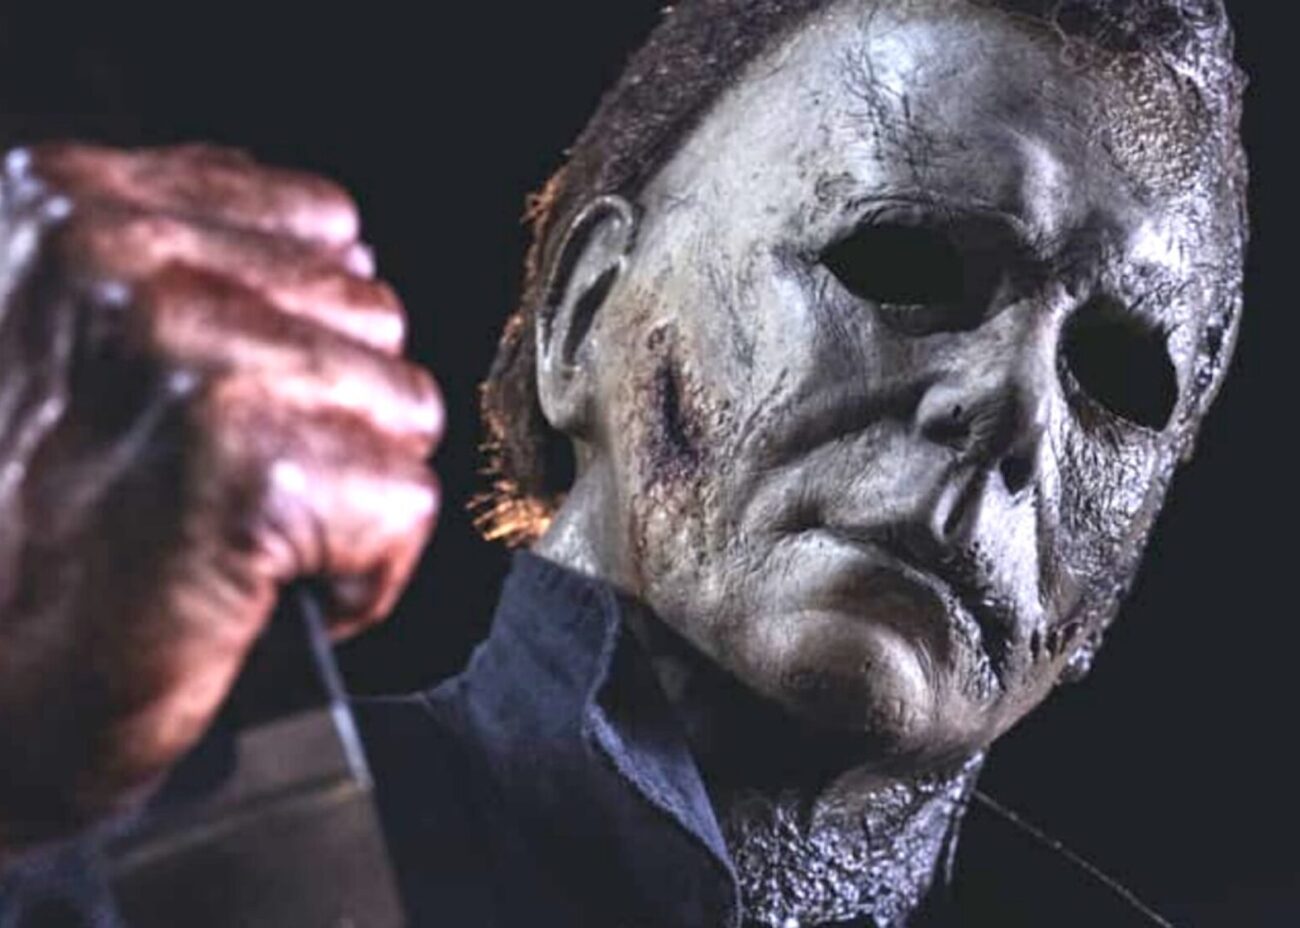 Is there any slasher film with a killer as horrific as 'Halloween''s Michael Myers? See our list of homicidal maniacs that don't shy away from gore.